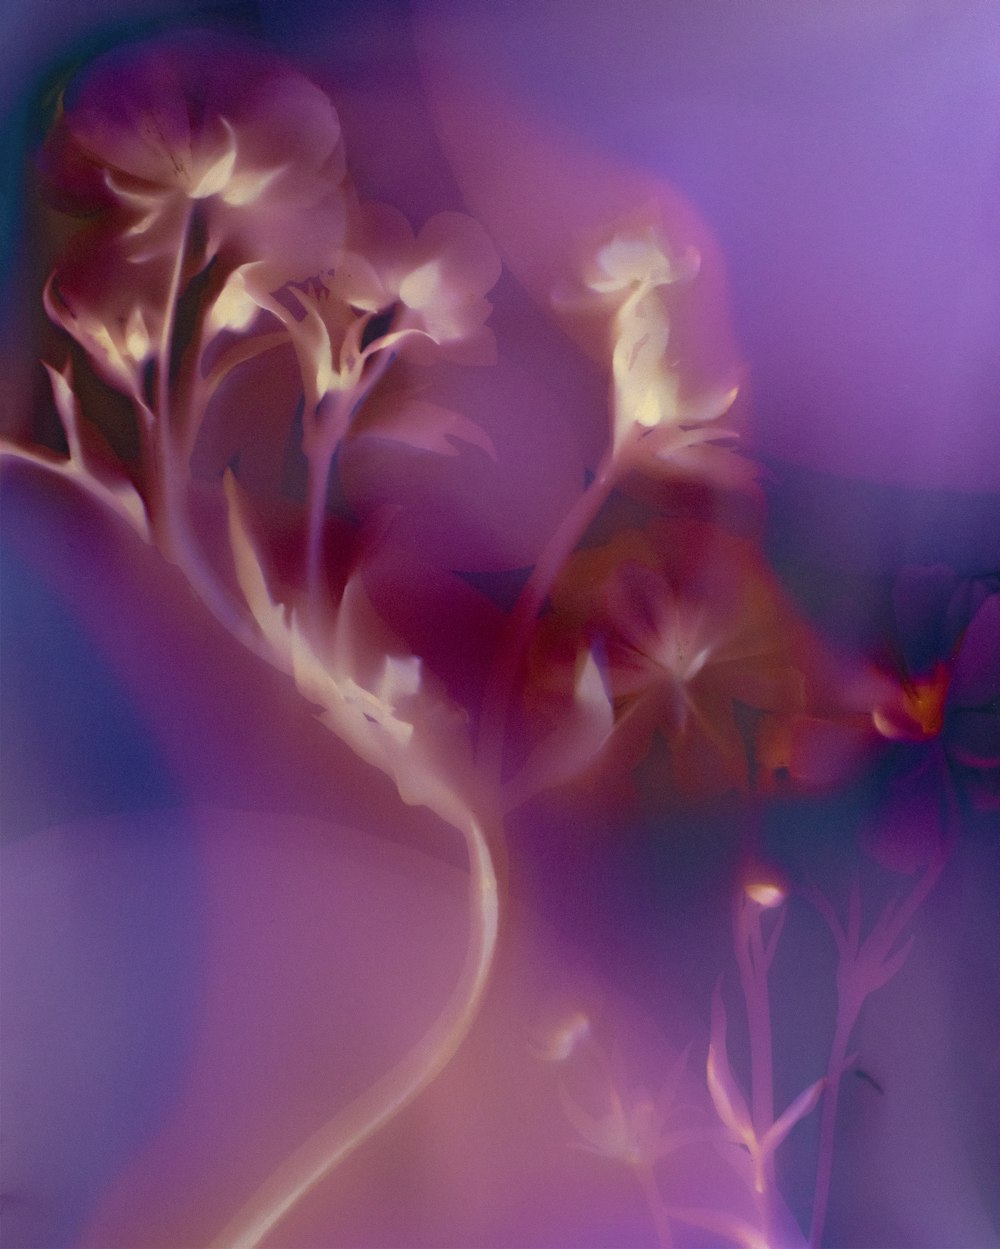 a blurry image of flowers in a vase